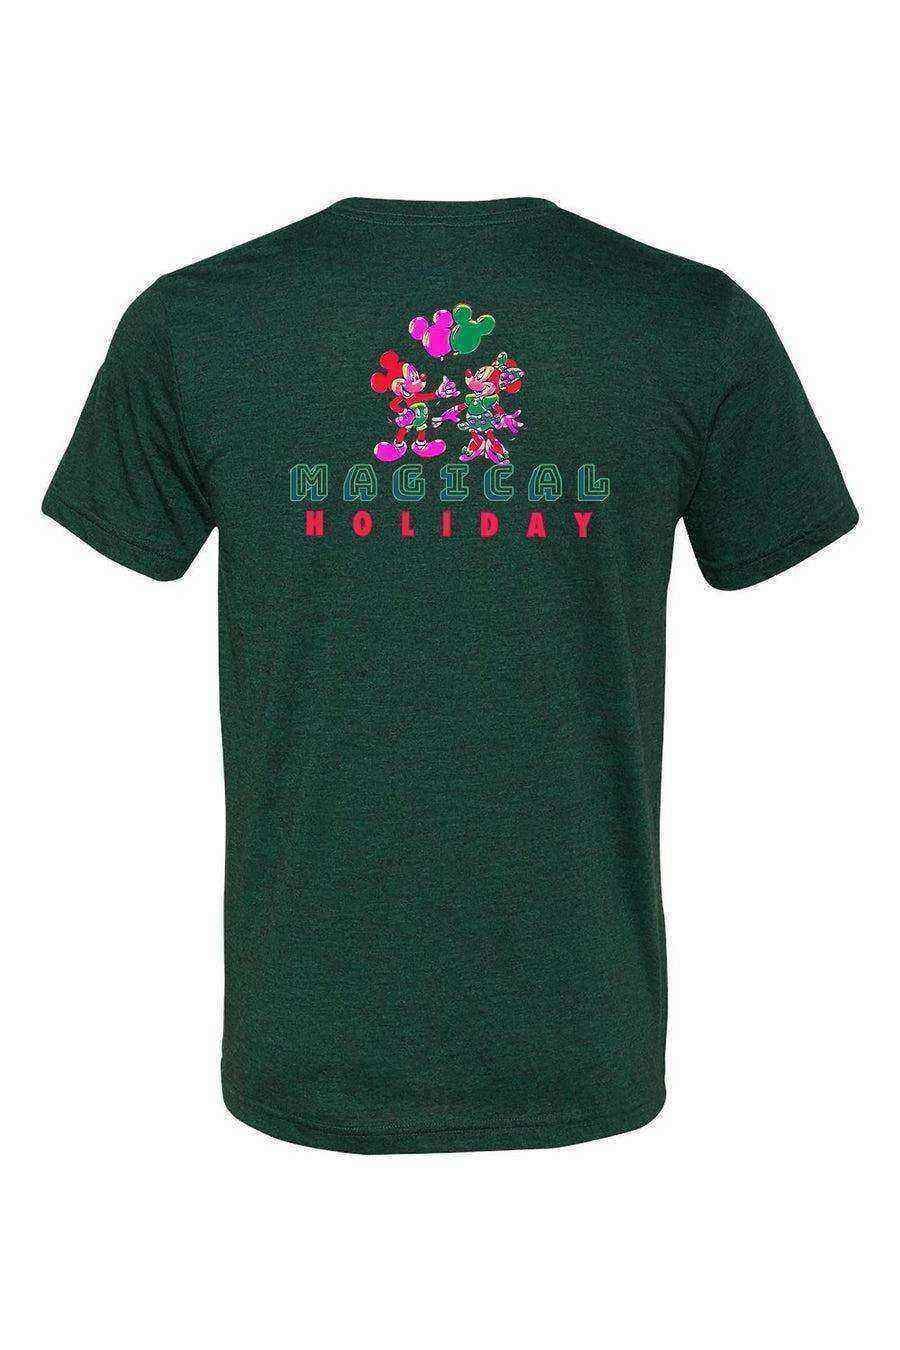 Mouse Magical Holiday Shirt | Minnie & Mickey Christmas - Dylan's Tees